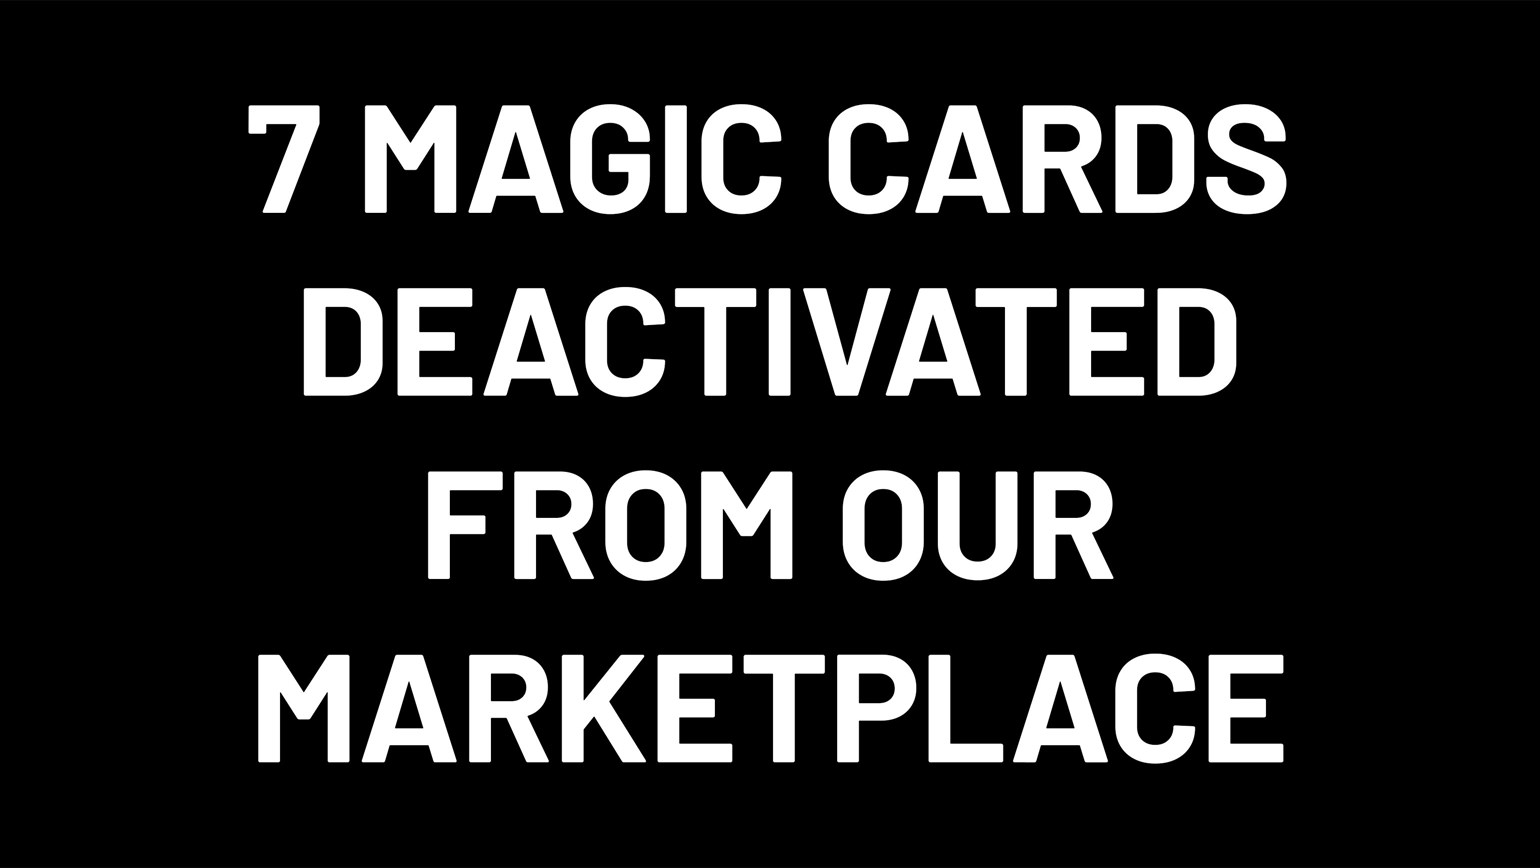 7 Magic Cards Deactivated From Our Marketplace